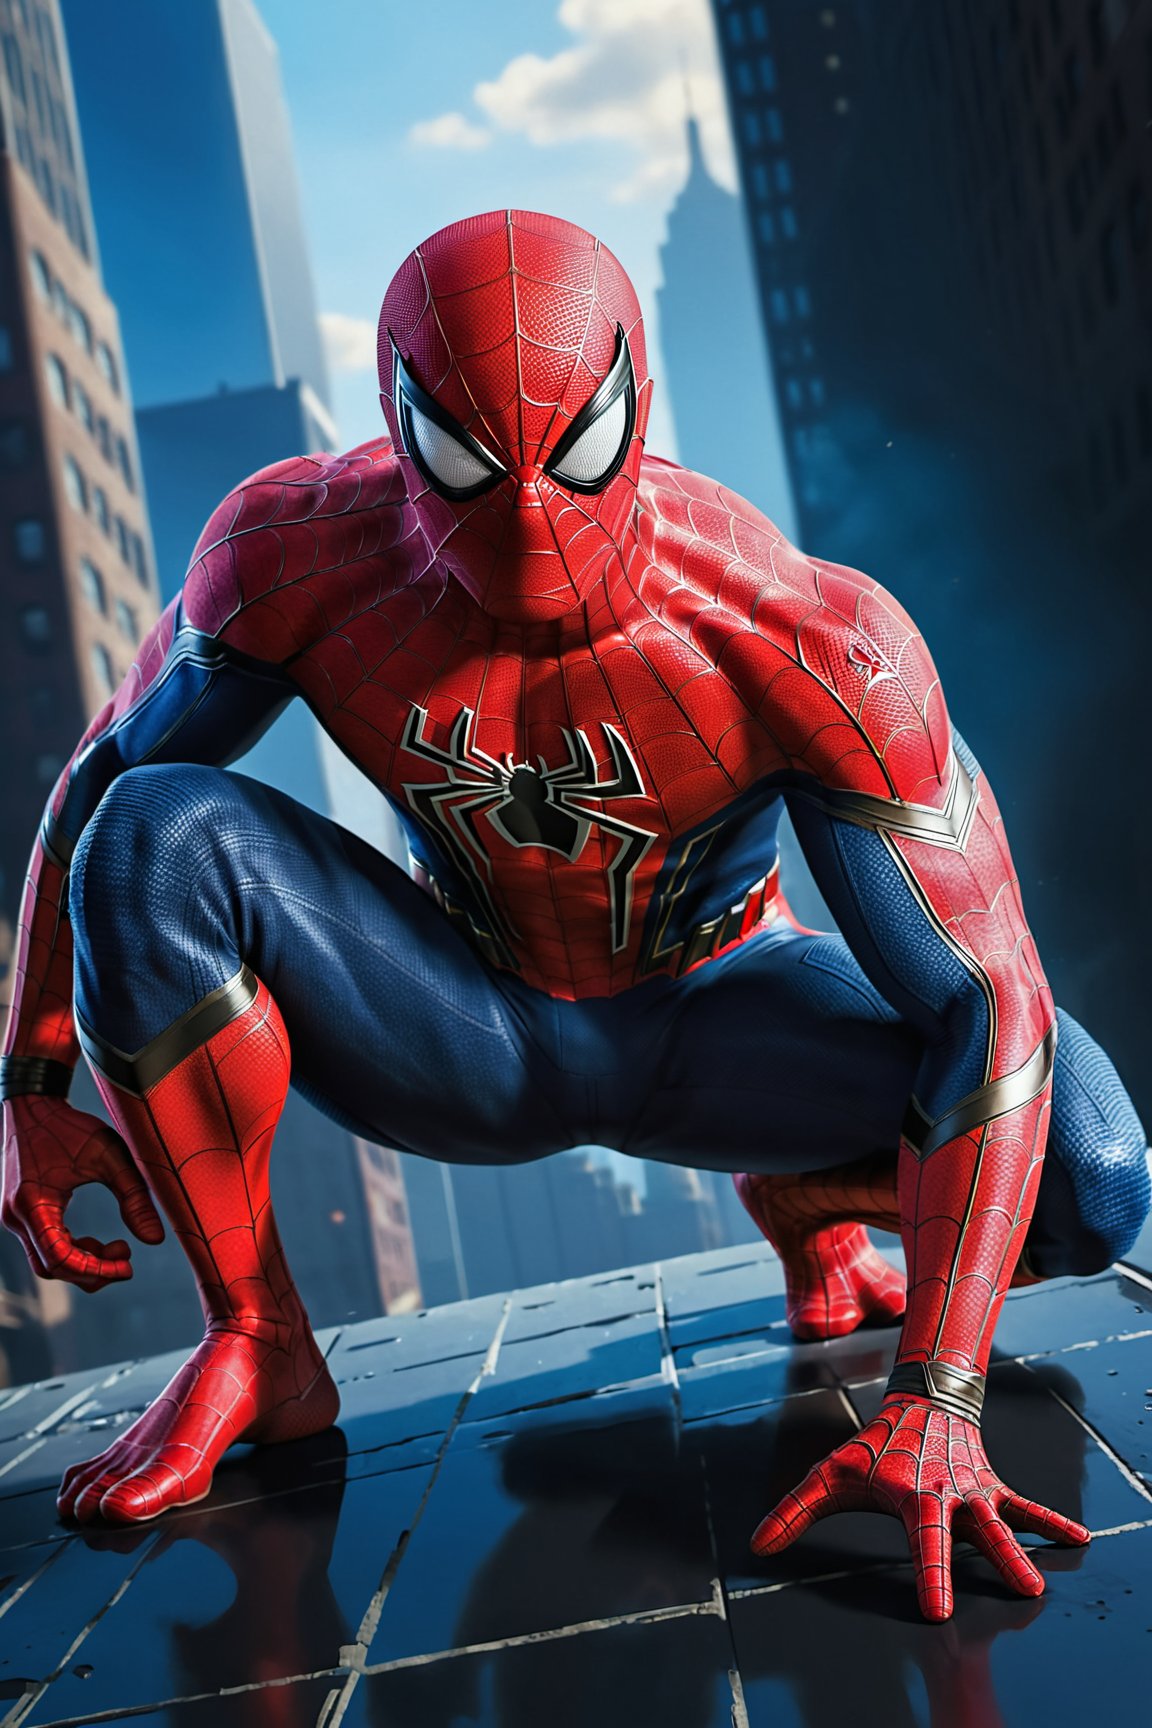 In this stunning depiction, capturing the intensity of spiderman in a squating down pose, he exudes a fierce and formidable presence. This high-quality image, rendered in 8K Ultra HD, immerses viewers in the intricate details of the scene. Whether it is a digitally enhanced photograph or an intricately painted masterpiece, this visually striking portrayal showcases spiderman in all his powerful glory.

